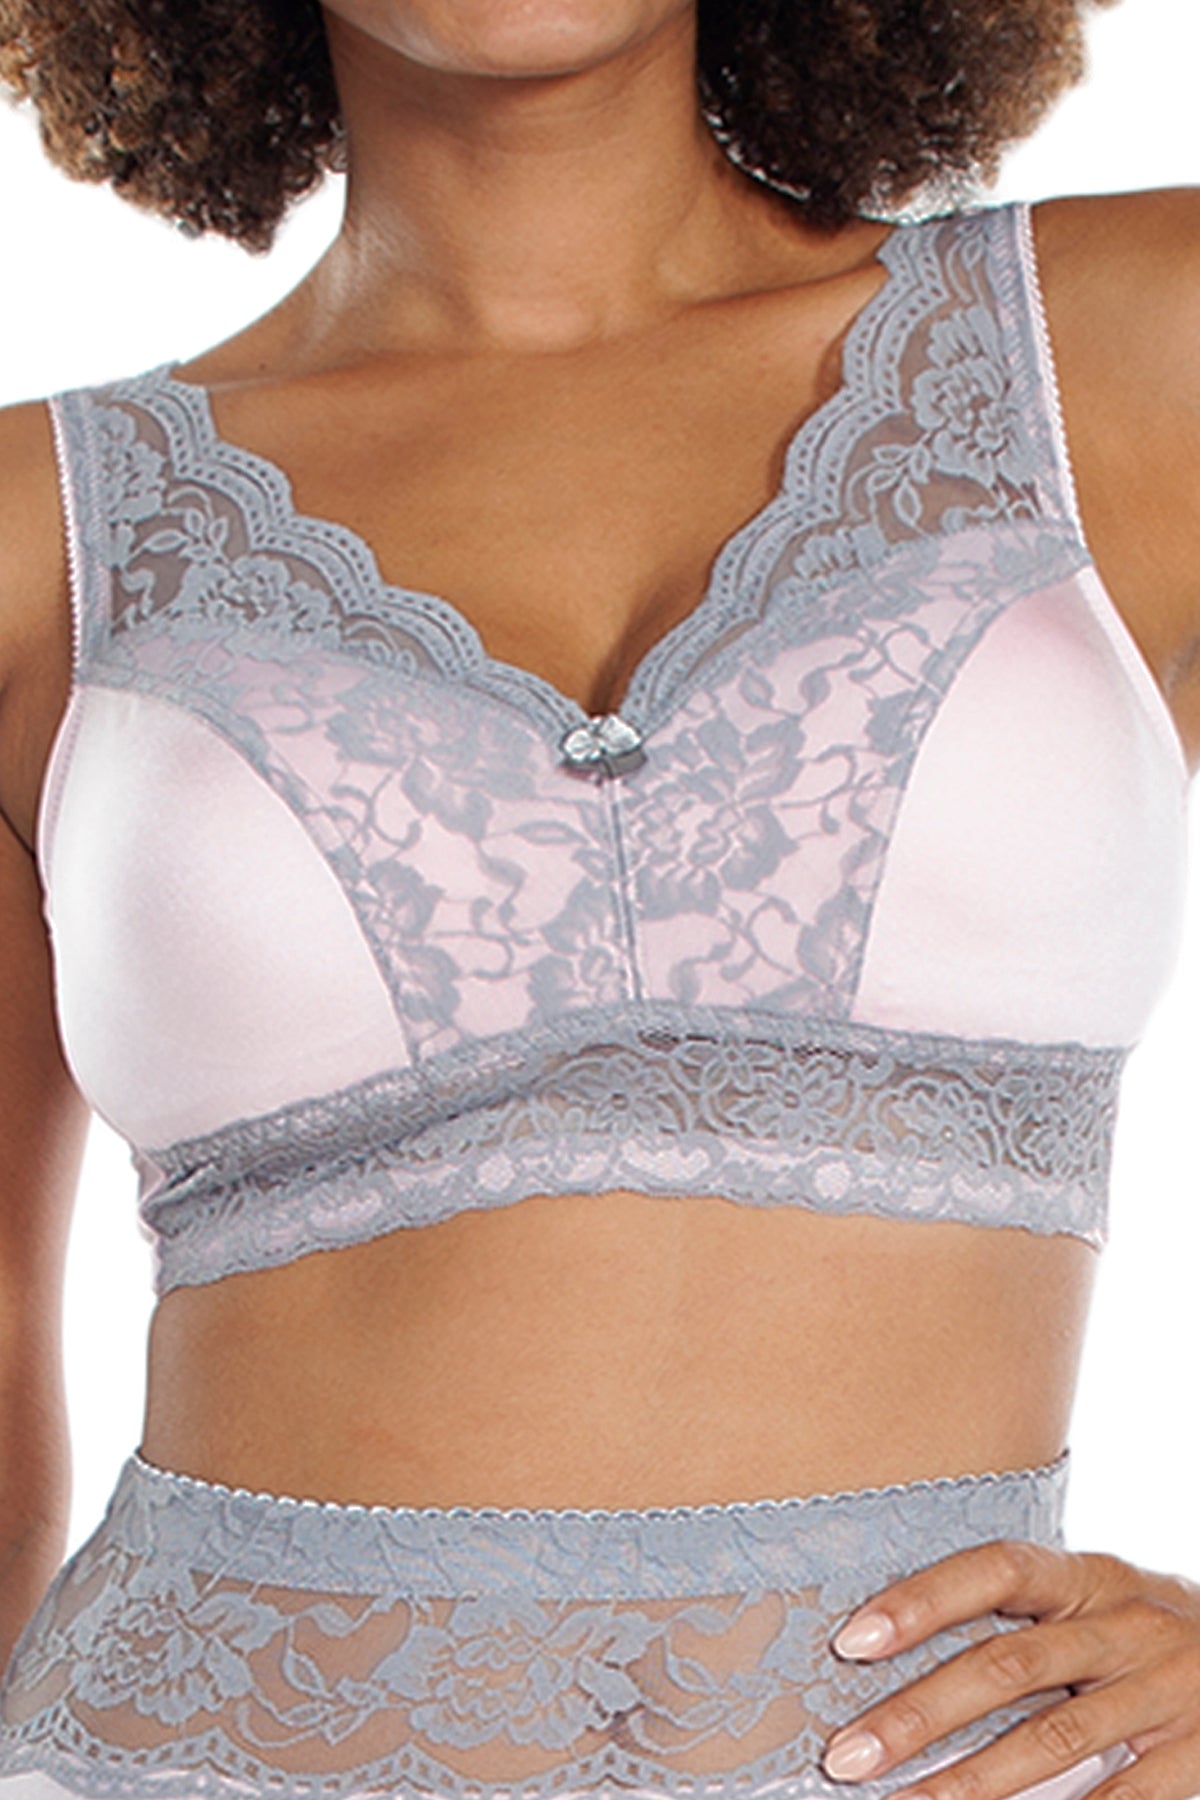 Women's Rhonda Shear 672P Ahh Pin-Up Lace Leisure Bra with Removable Pads  (Steel Gray 3X) 